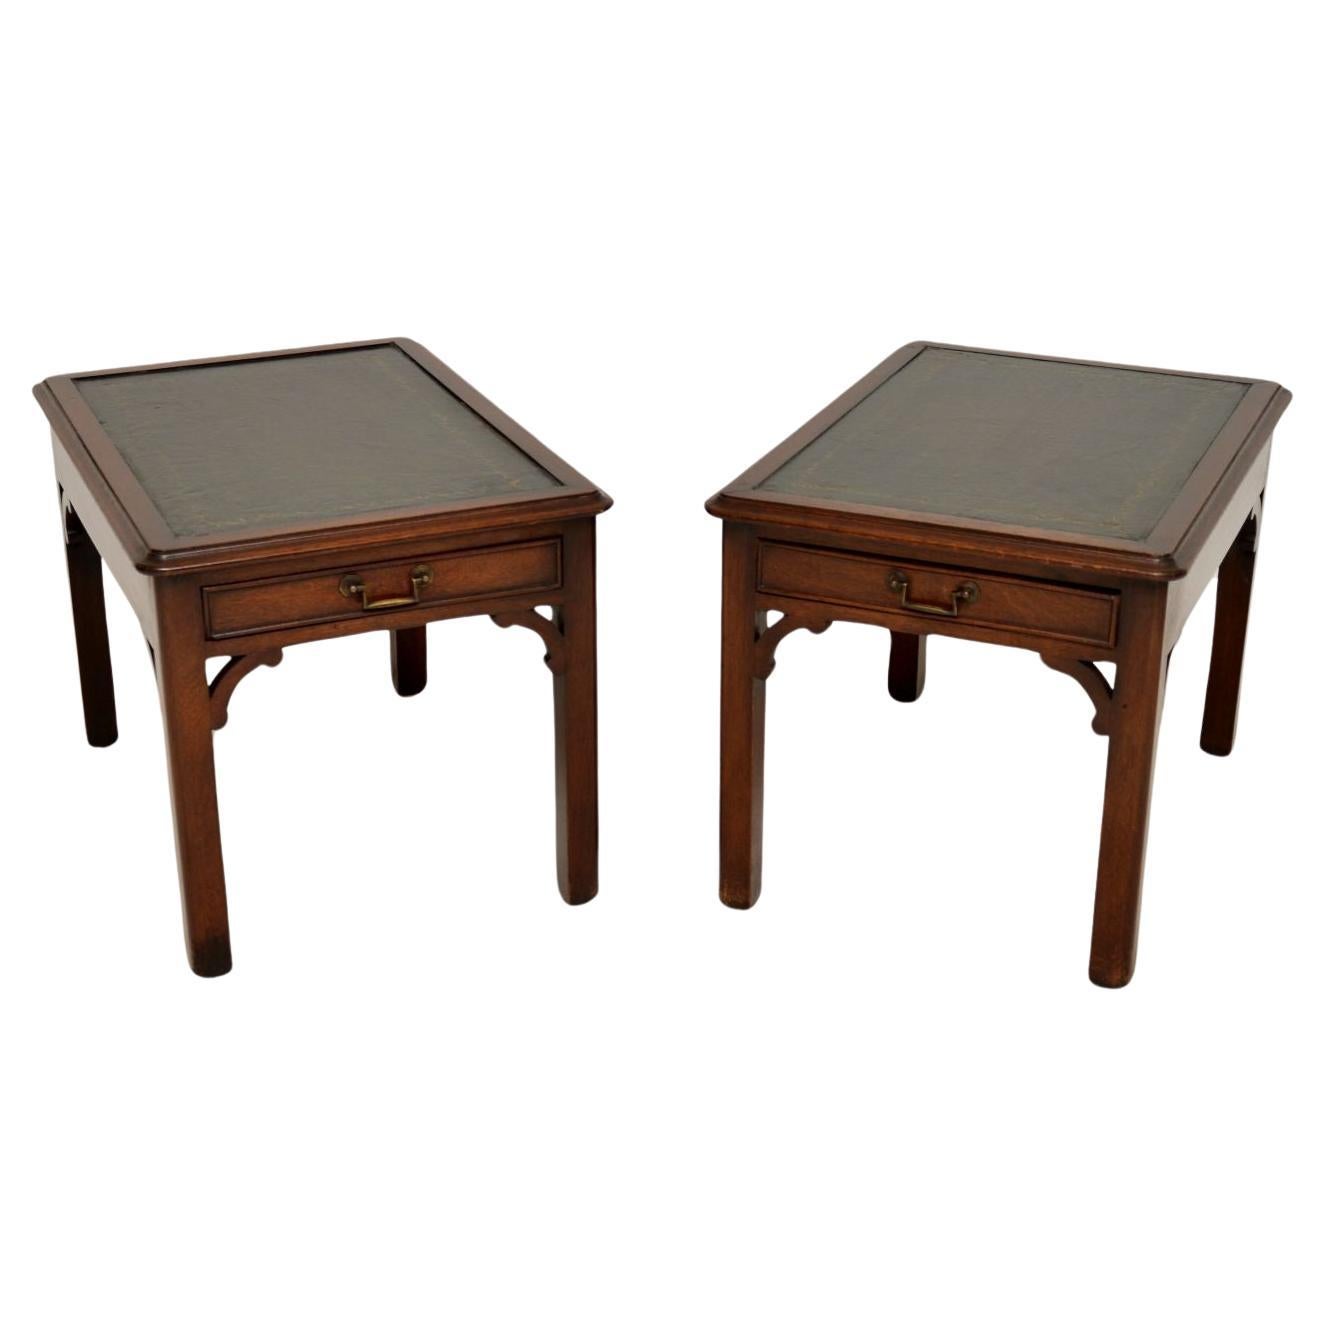 Pair of Antique Leather Top Side Tables